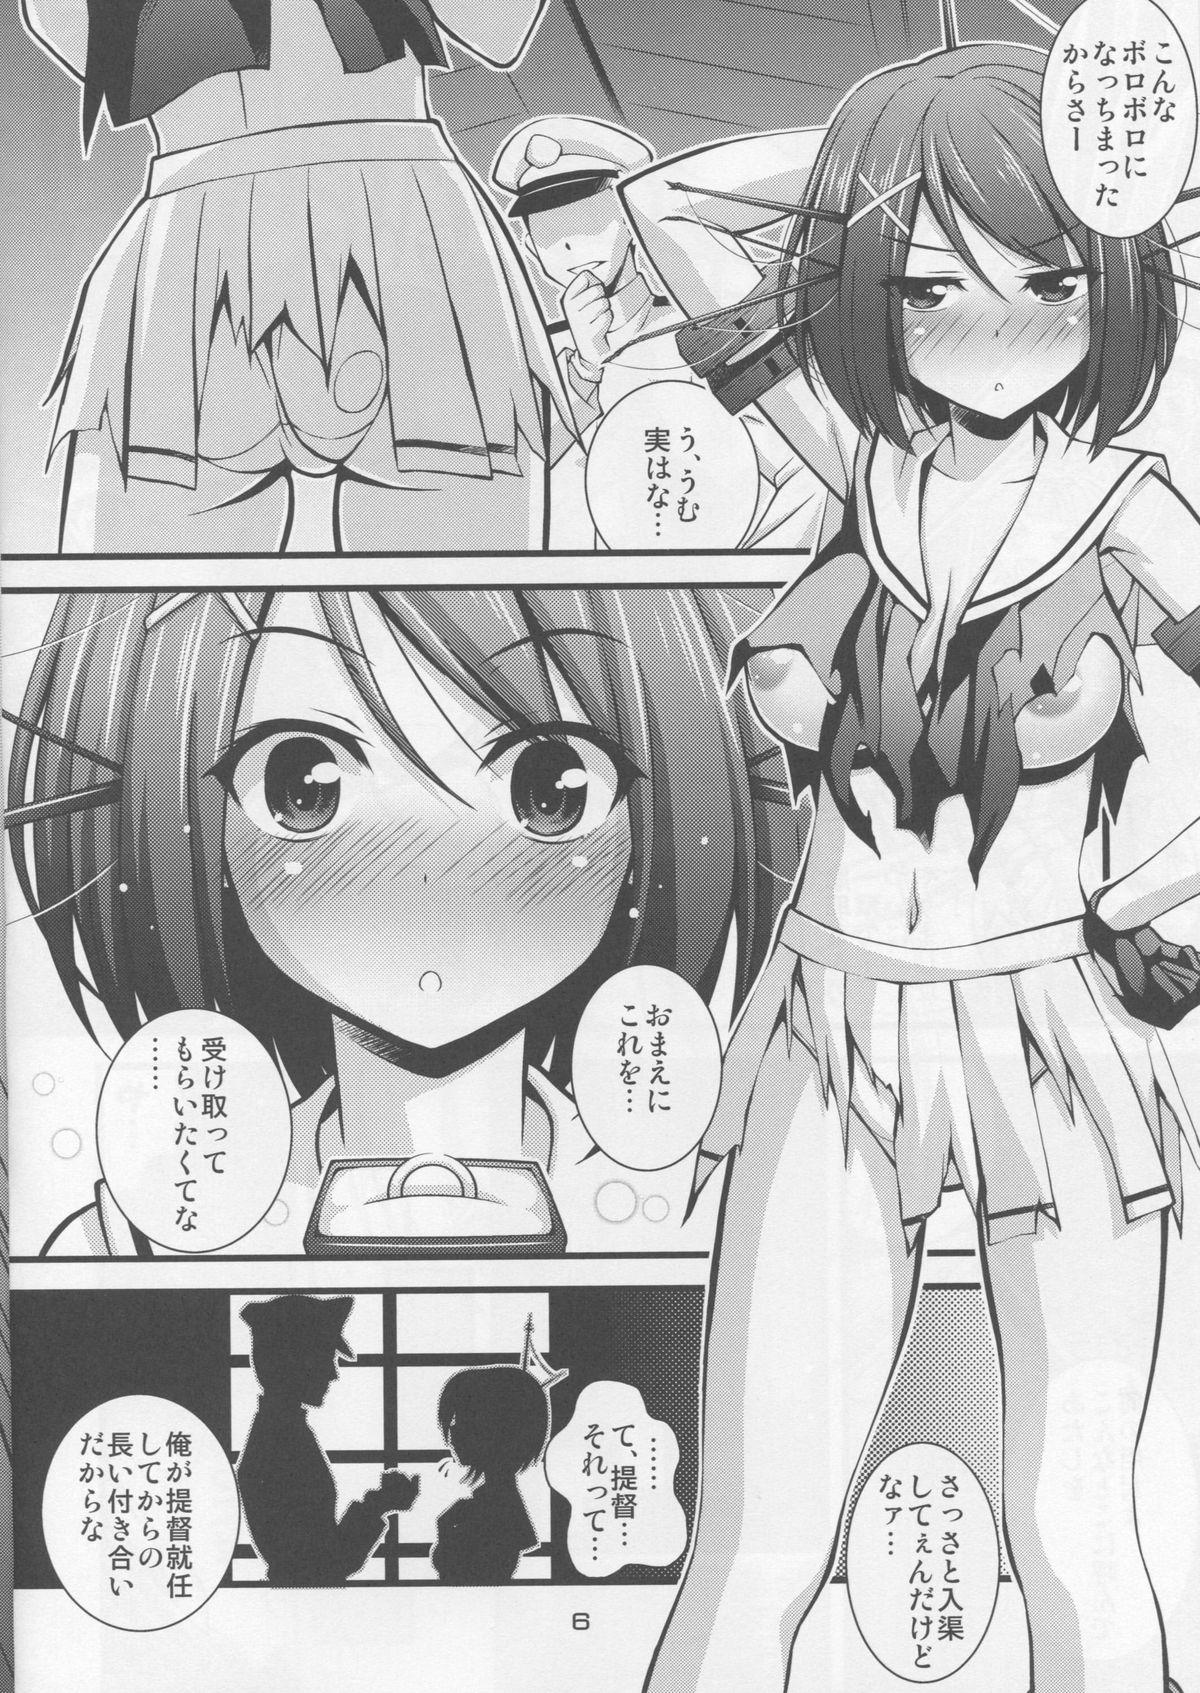 Africa Steel Mayonnaise 13 - Kantai collection Hardsex - Page 5